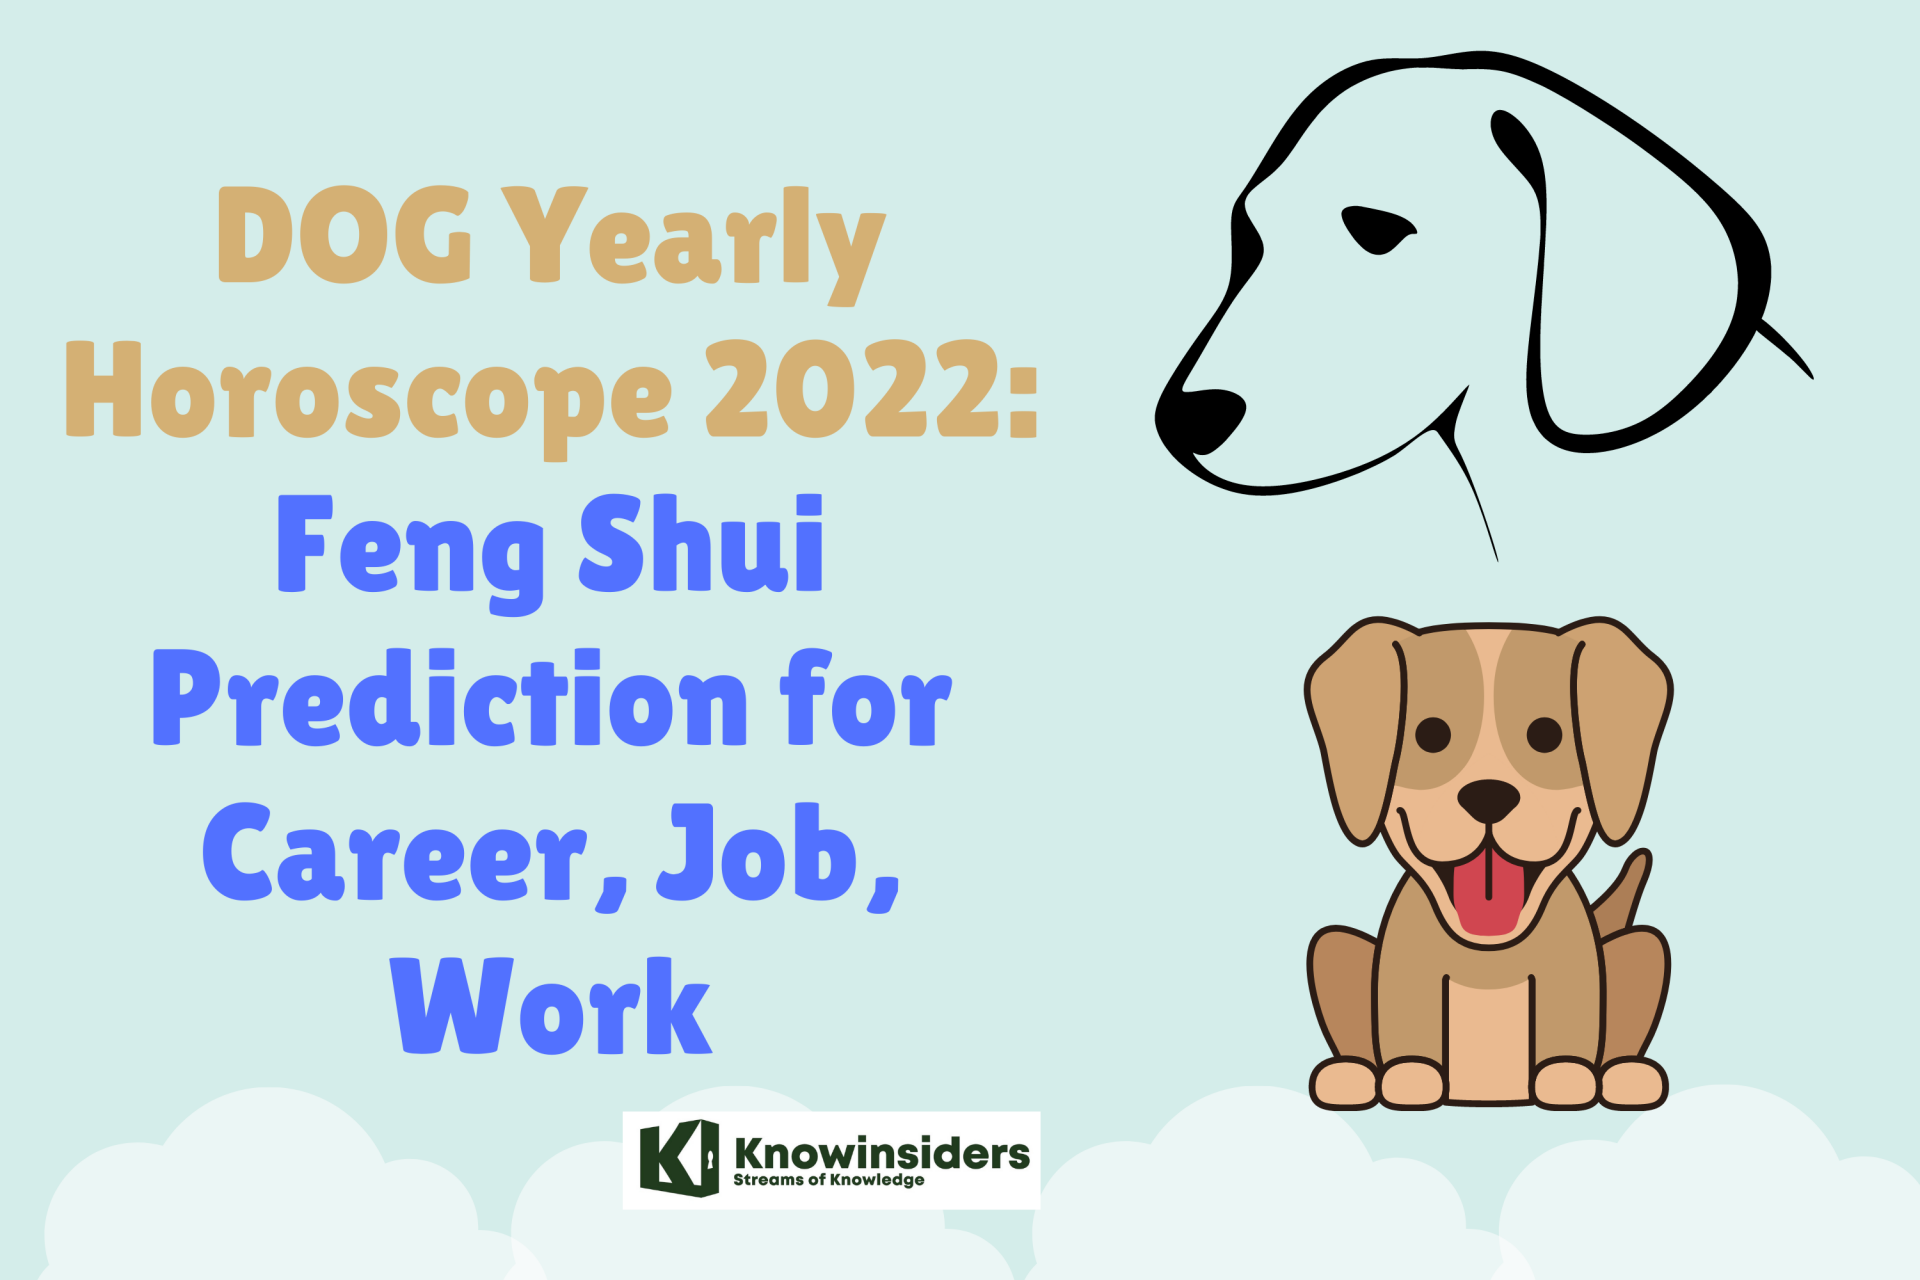 DOG Yearly Horoscope 2022 – Feng Shui Prediction for Career, Job and Work